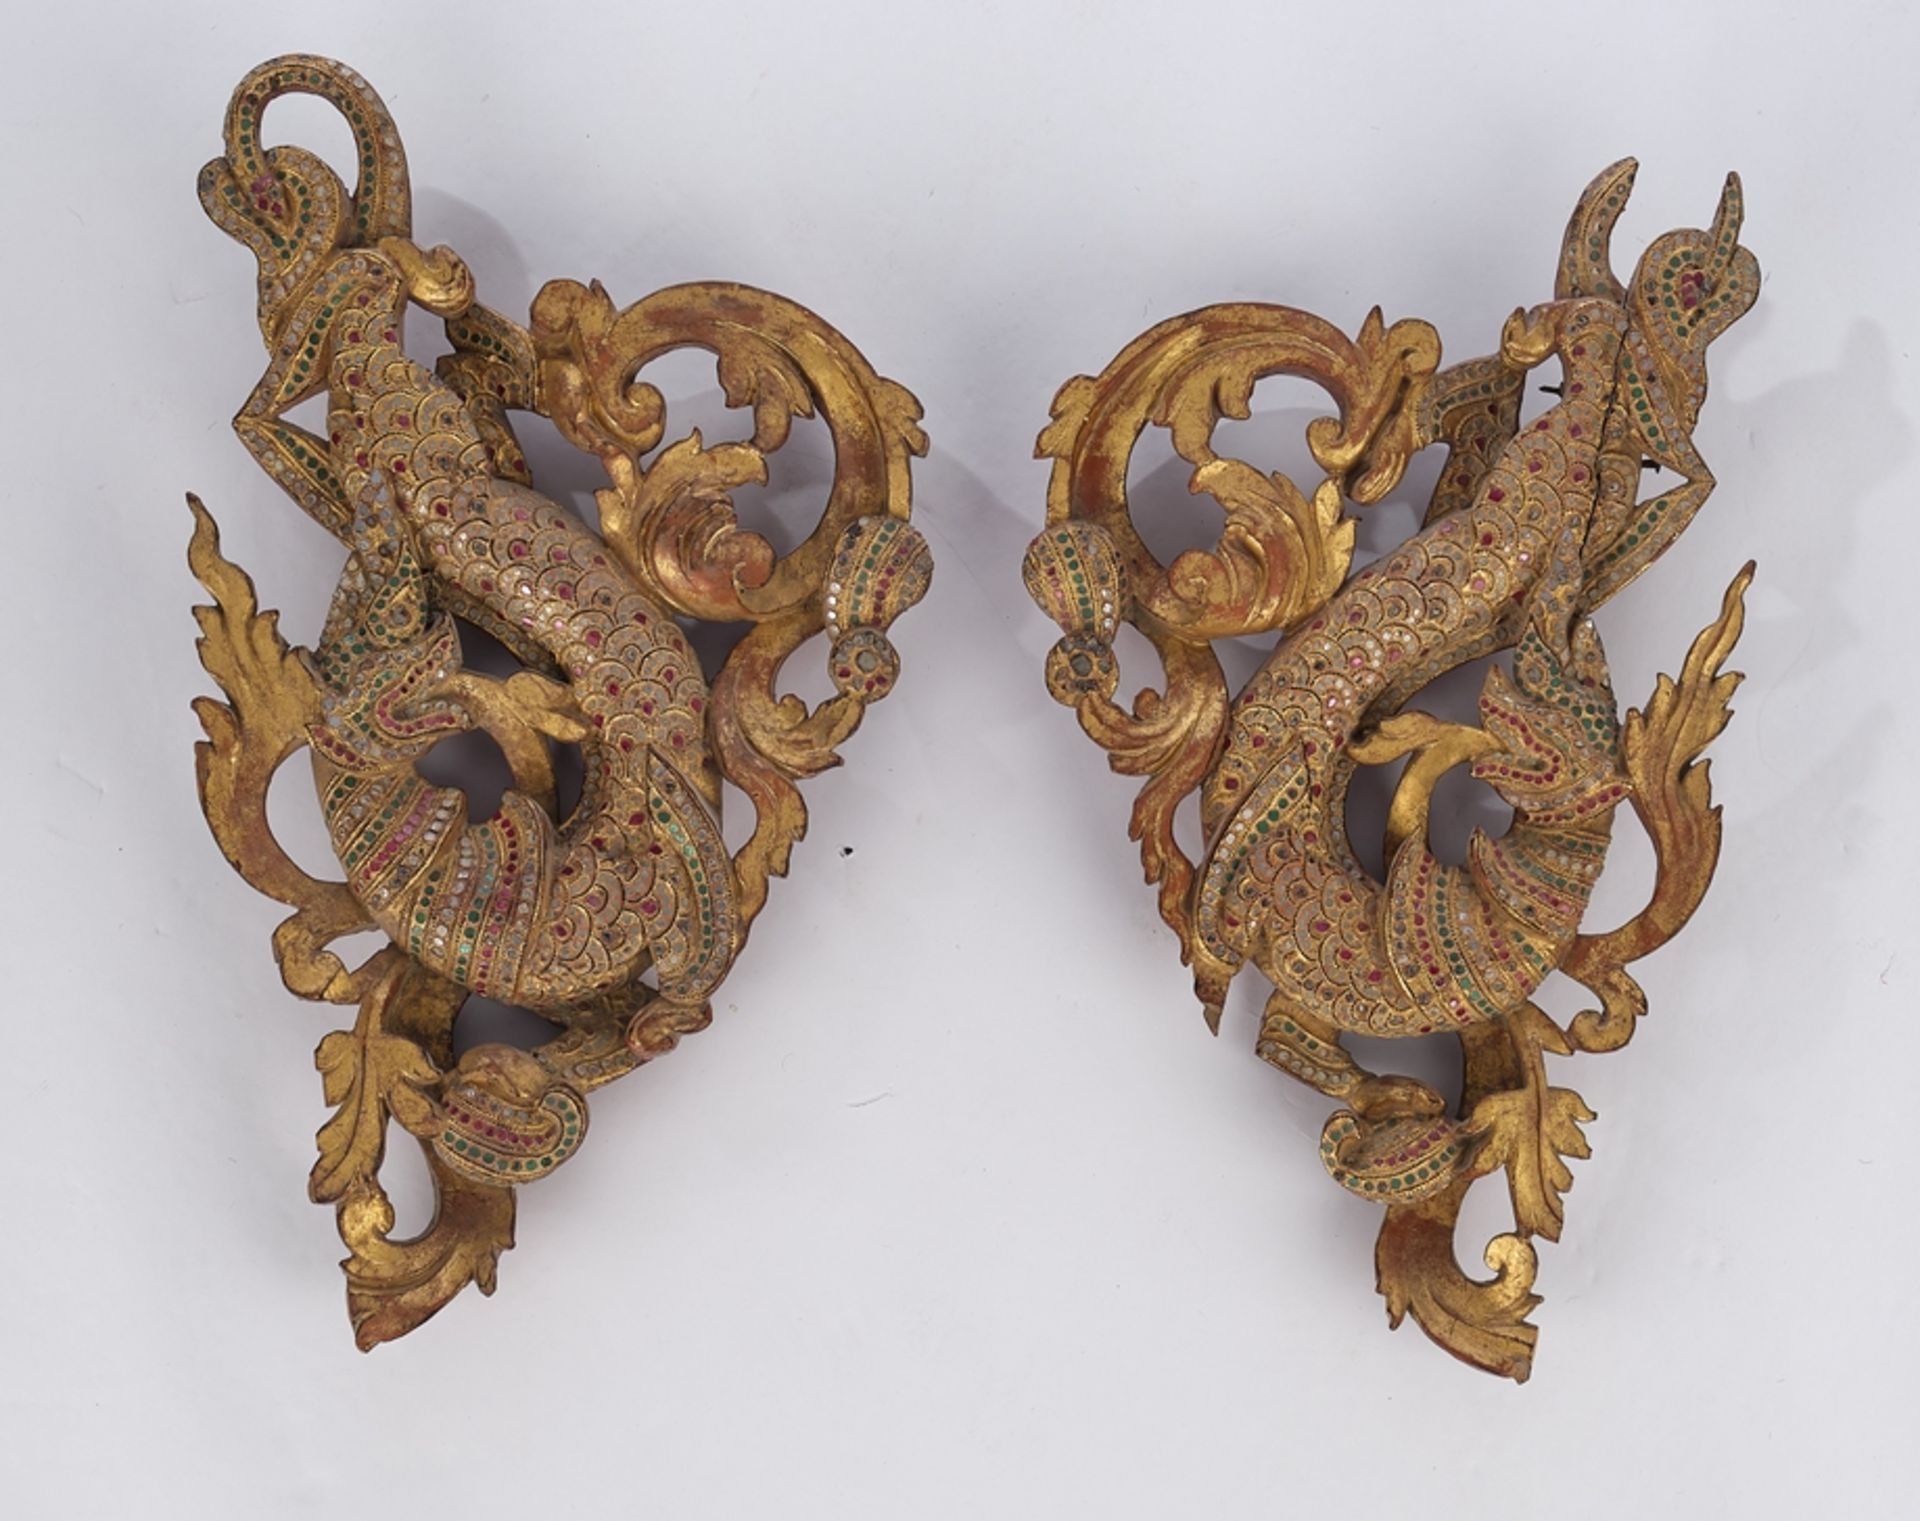 2 carvings, , "Dragons between leaf tendrils", Thailand, 19th/20th century, wood, gold bronzed, col